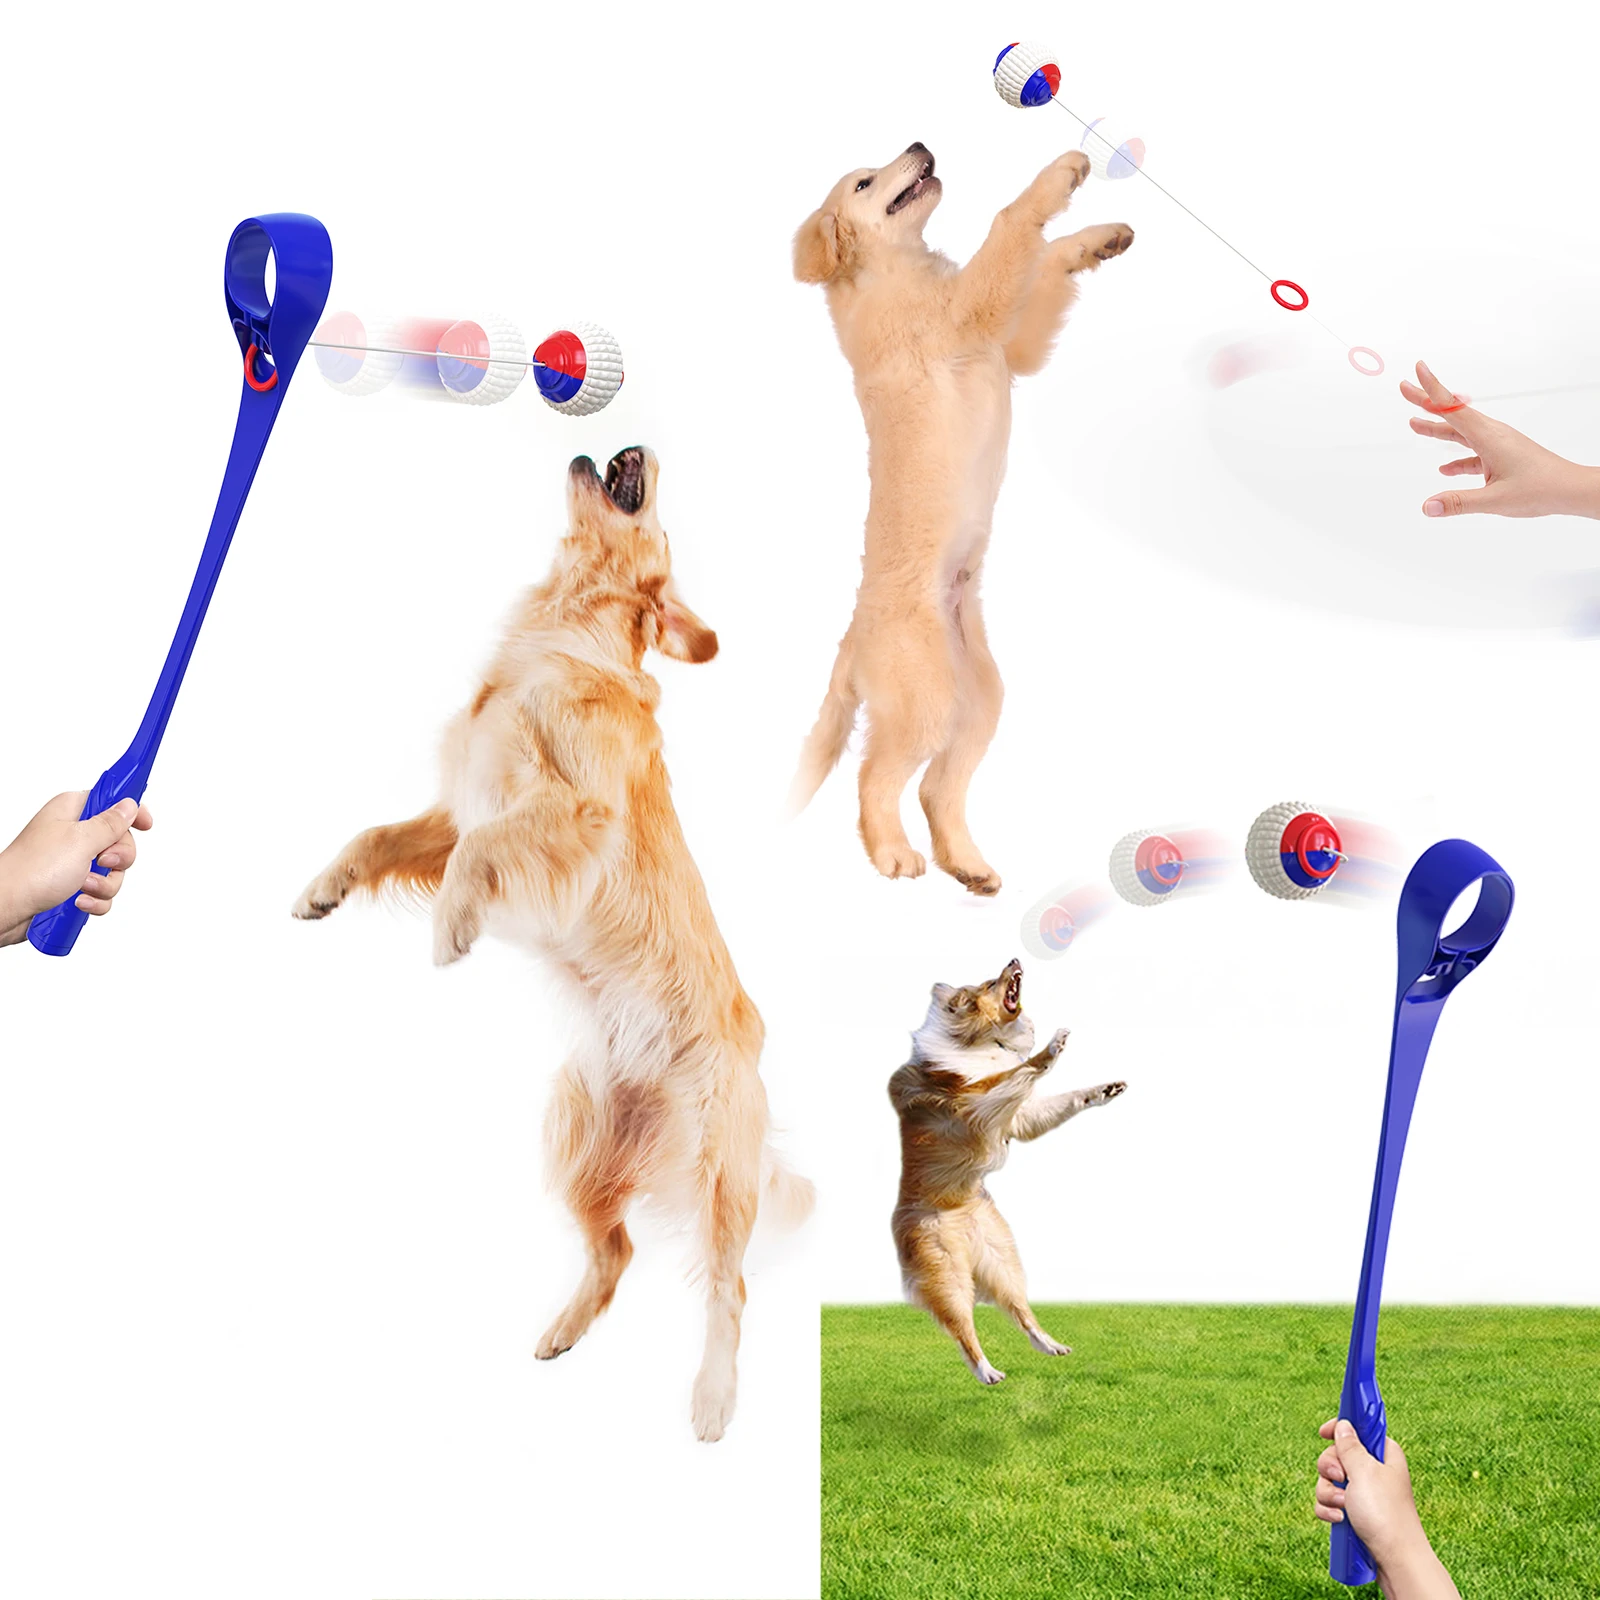 

Interaction Dogs Walking Toy Dog Throwing Interactive Toys Cue Stick Outdoor Throwing Ball, As the picture shows